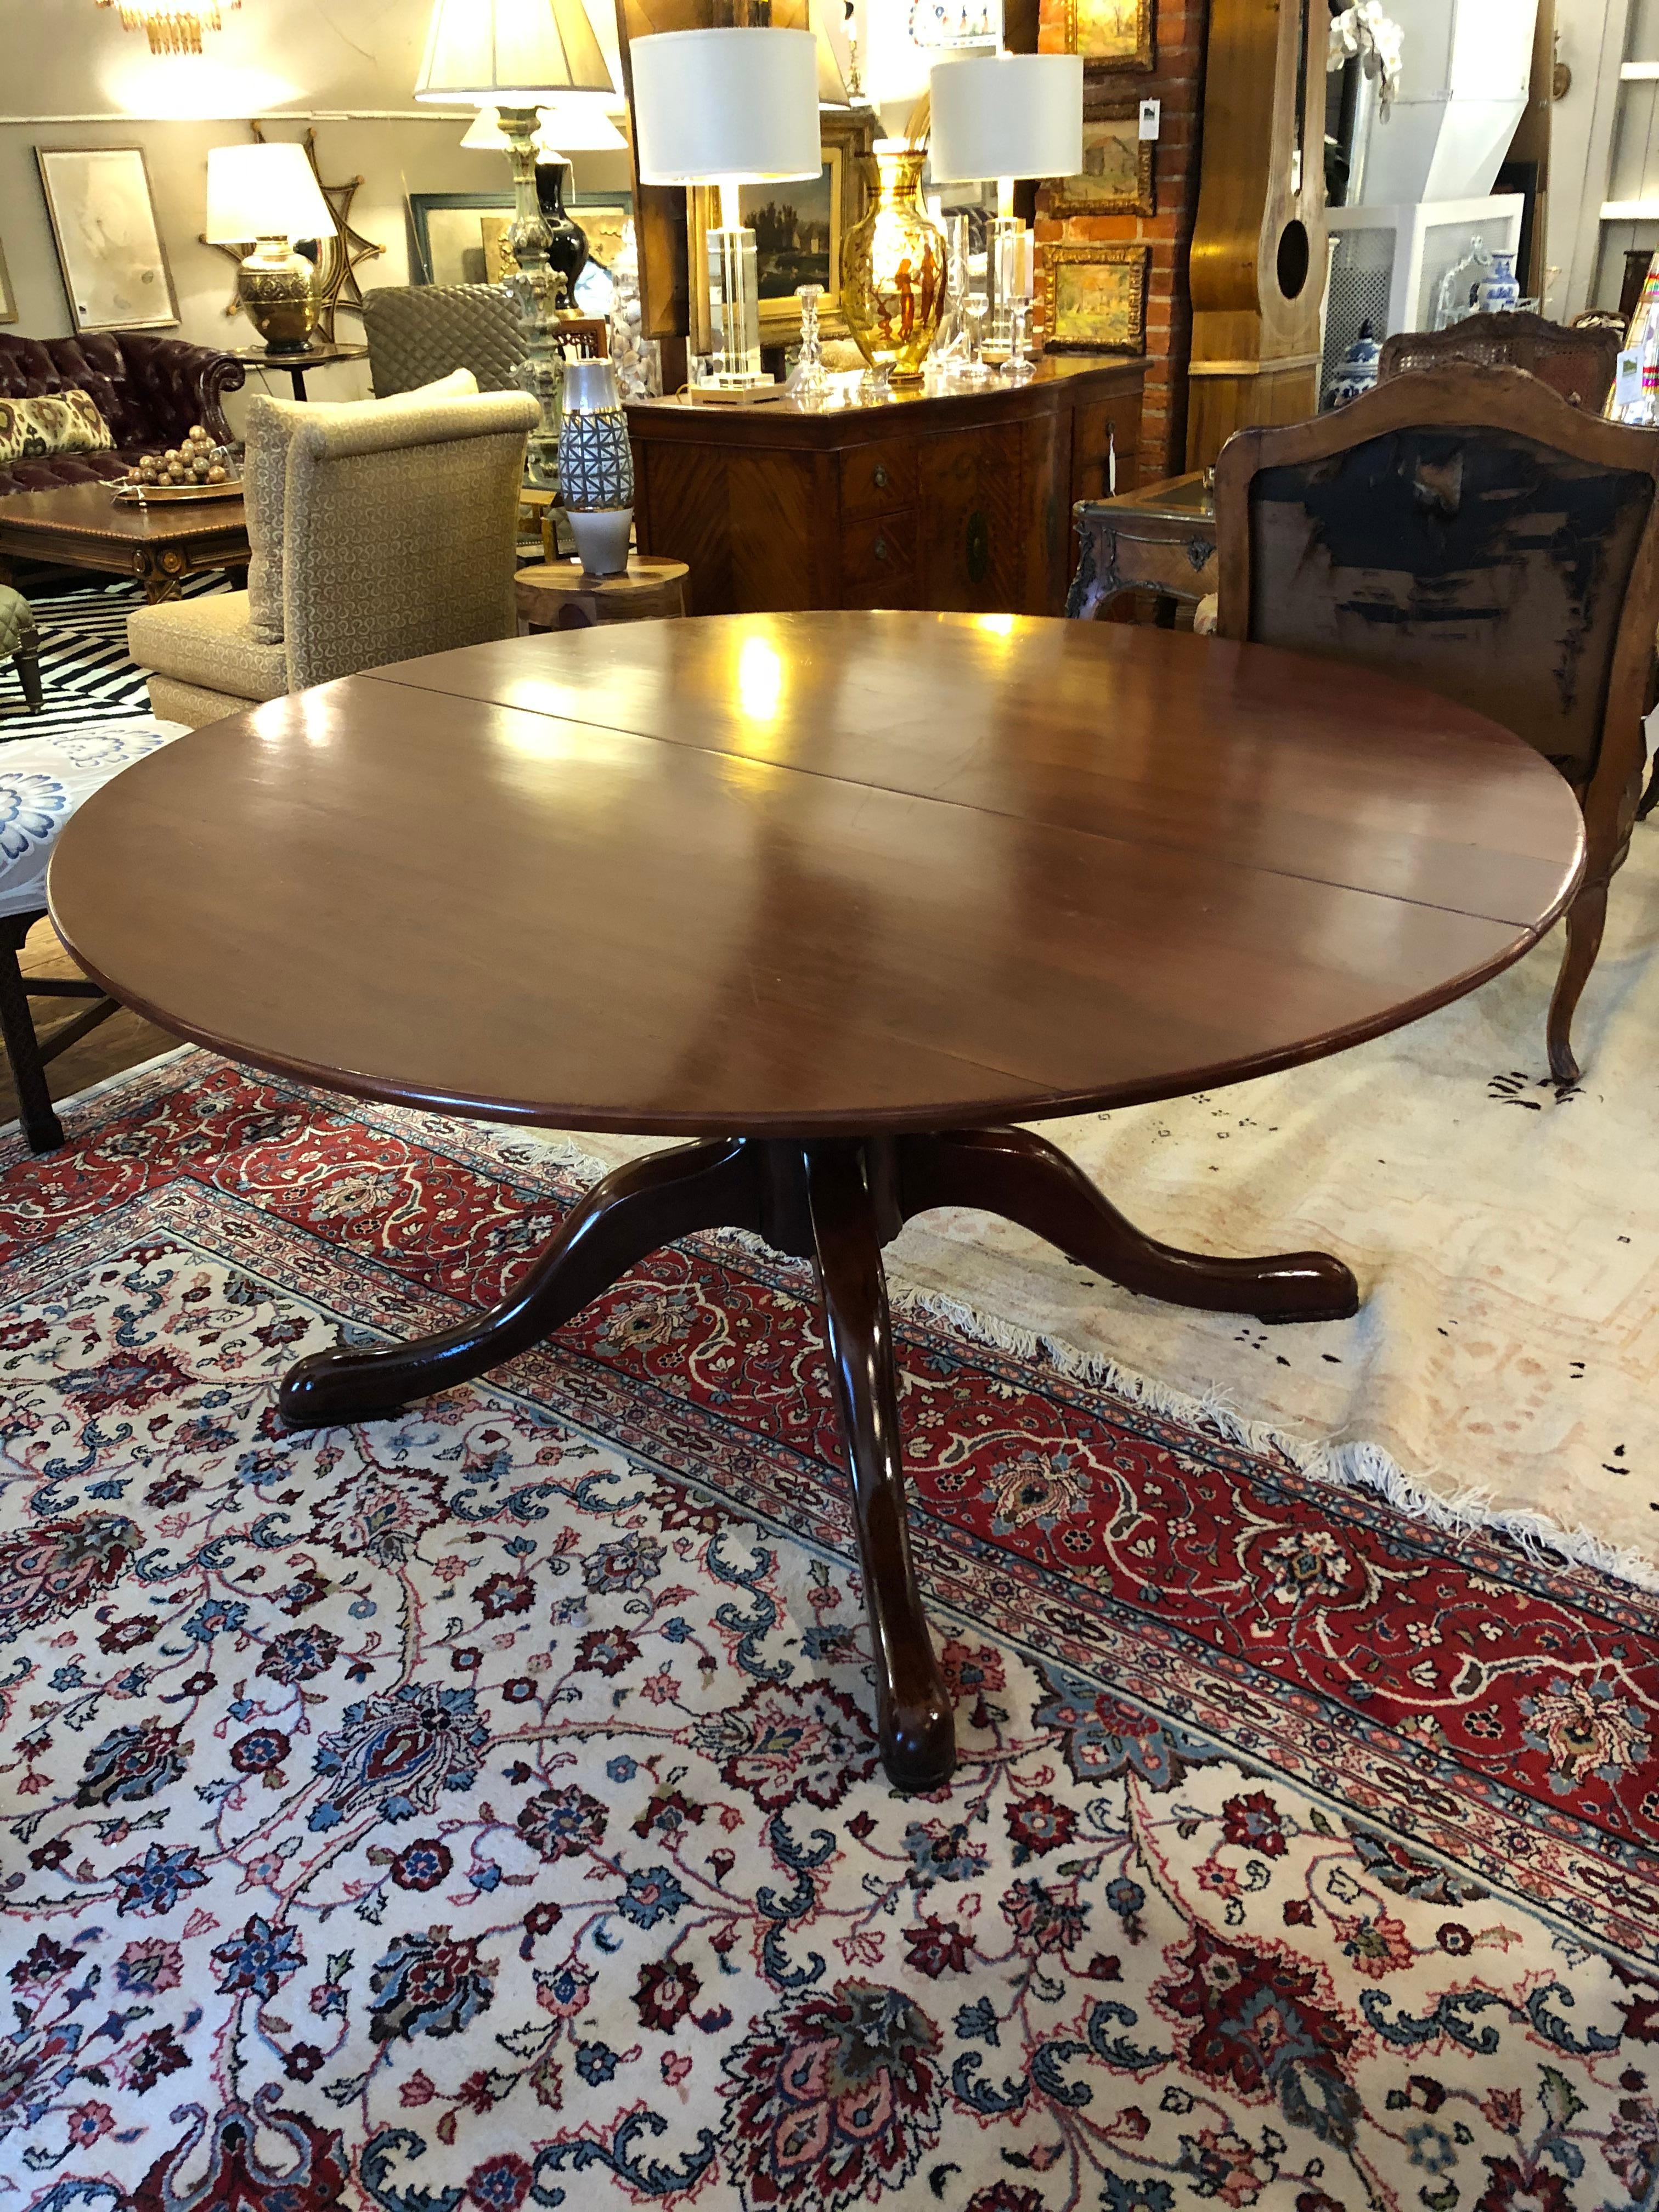 Custom made English country style dining table in cherrywood. Made in England, this round table measures 60